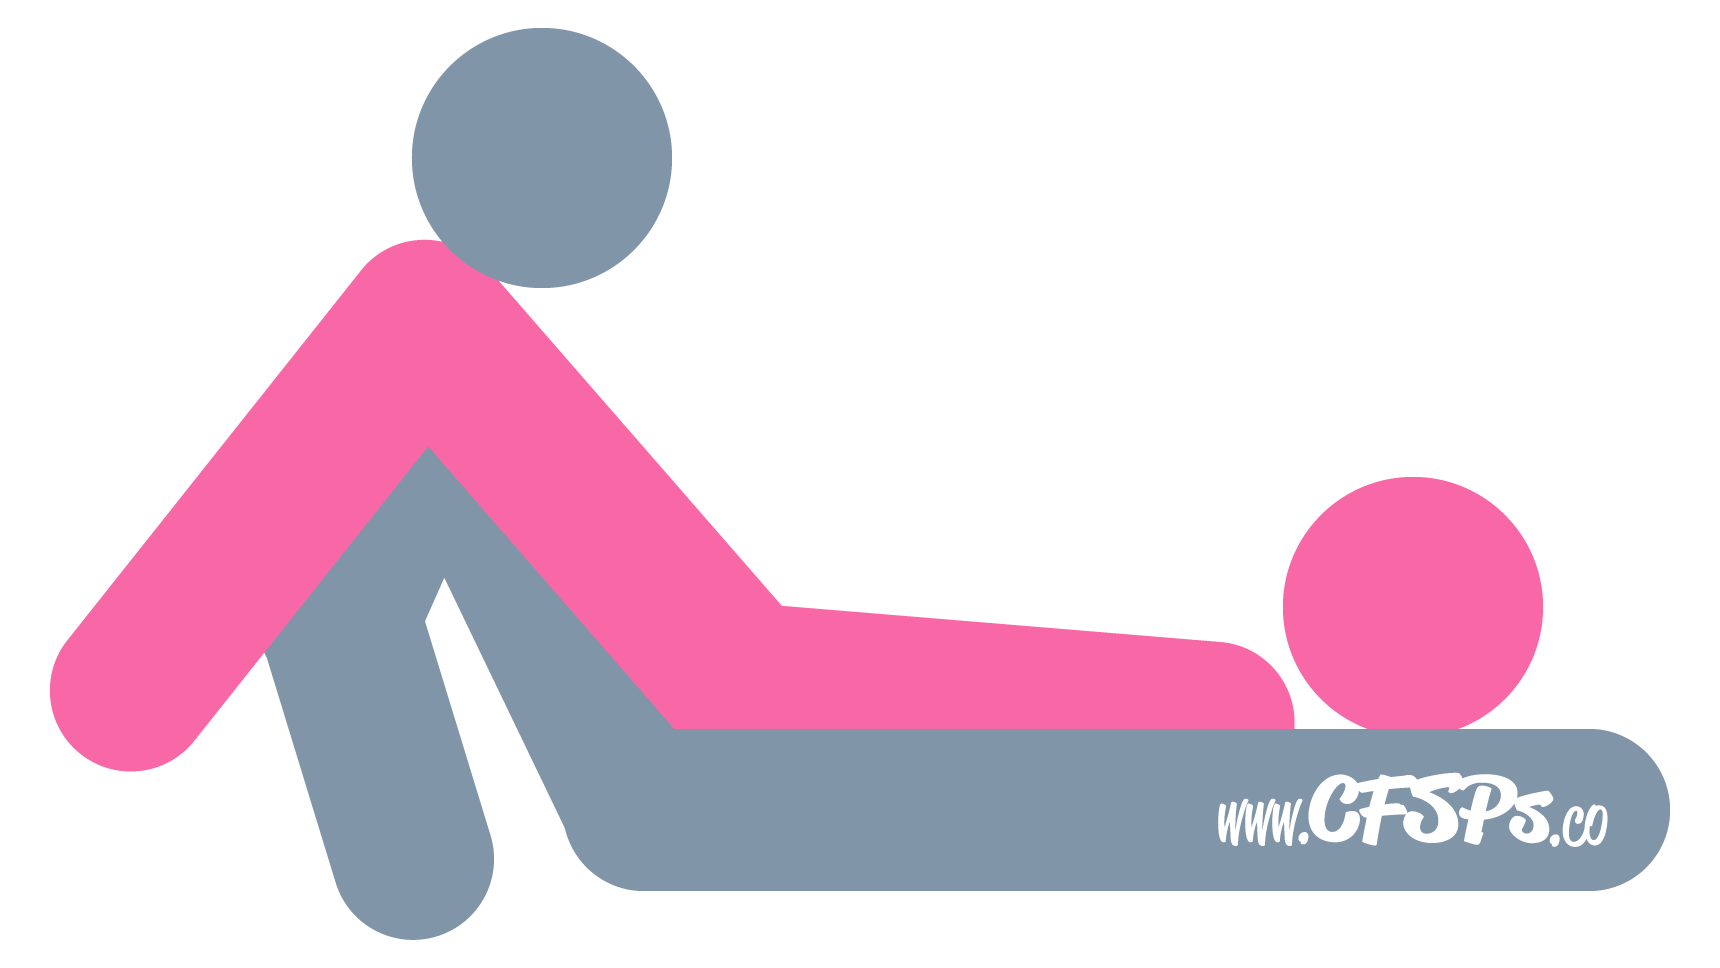 This stick figure image depicts a man and woman having sex in the Deckchair sex position. The man is sitting with his legs straight out and together, and he's supporting himself with his arms on the bed behind him. The woman is lying on her back on his legs with her pelvis near his and her legs over his shoulders.